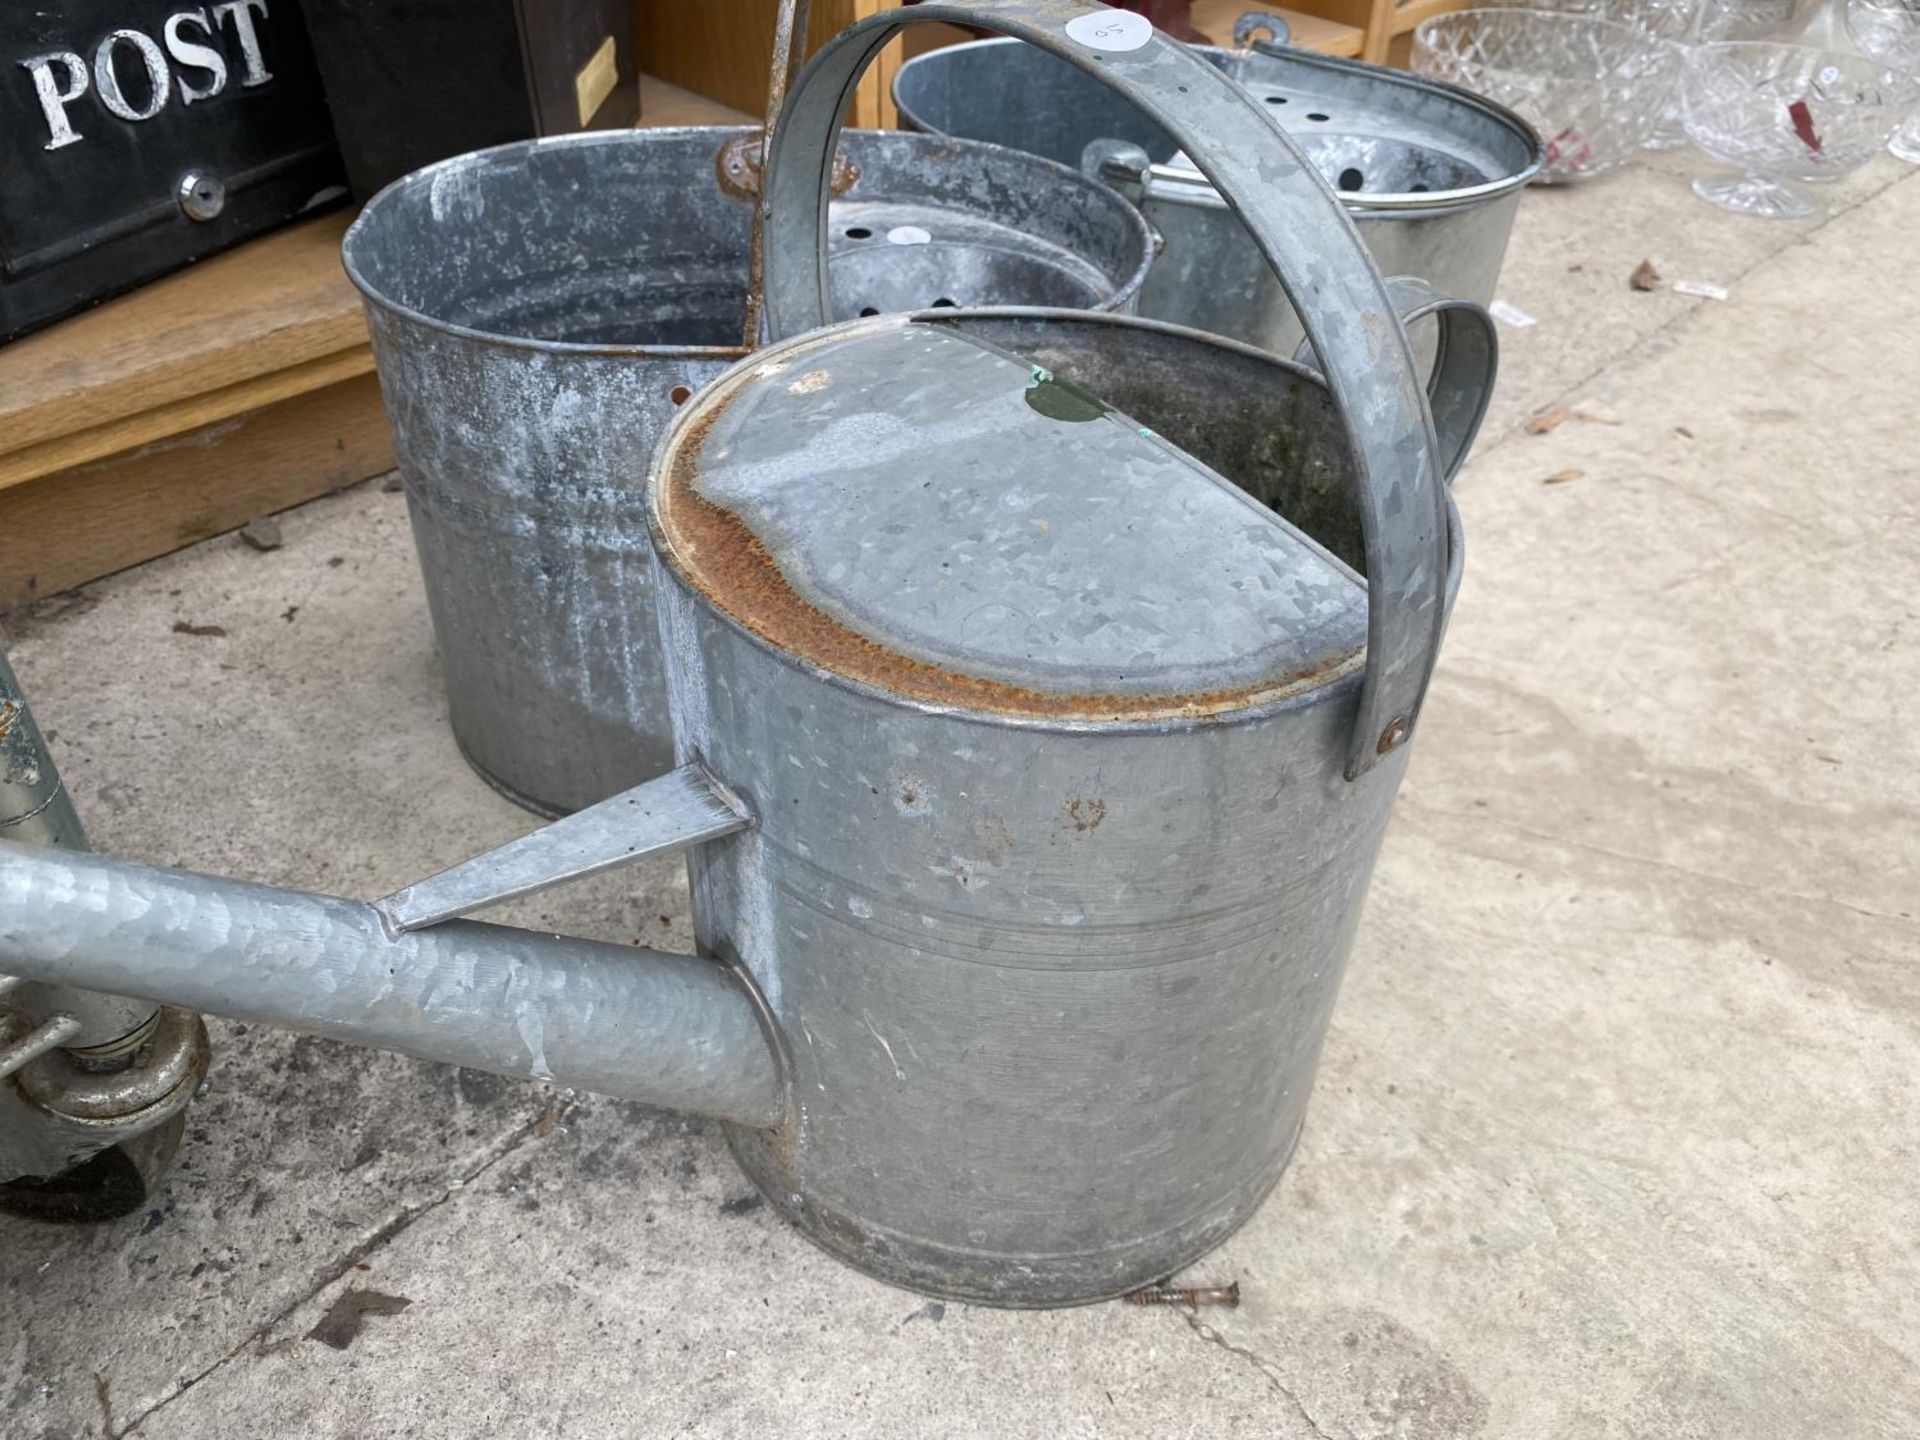 TWO GALVANISED MOP BUCKETS AND A GALVANISED WATERING CAN - Image 2 of 2